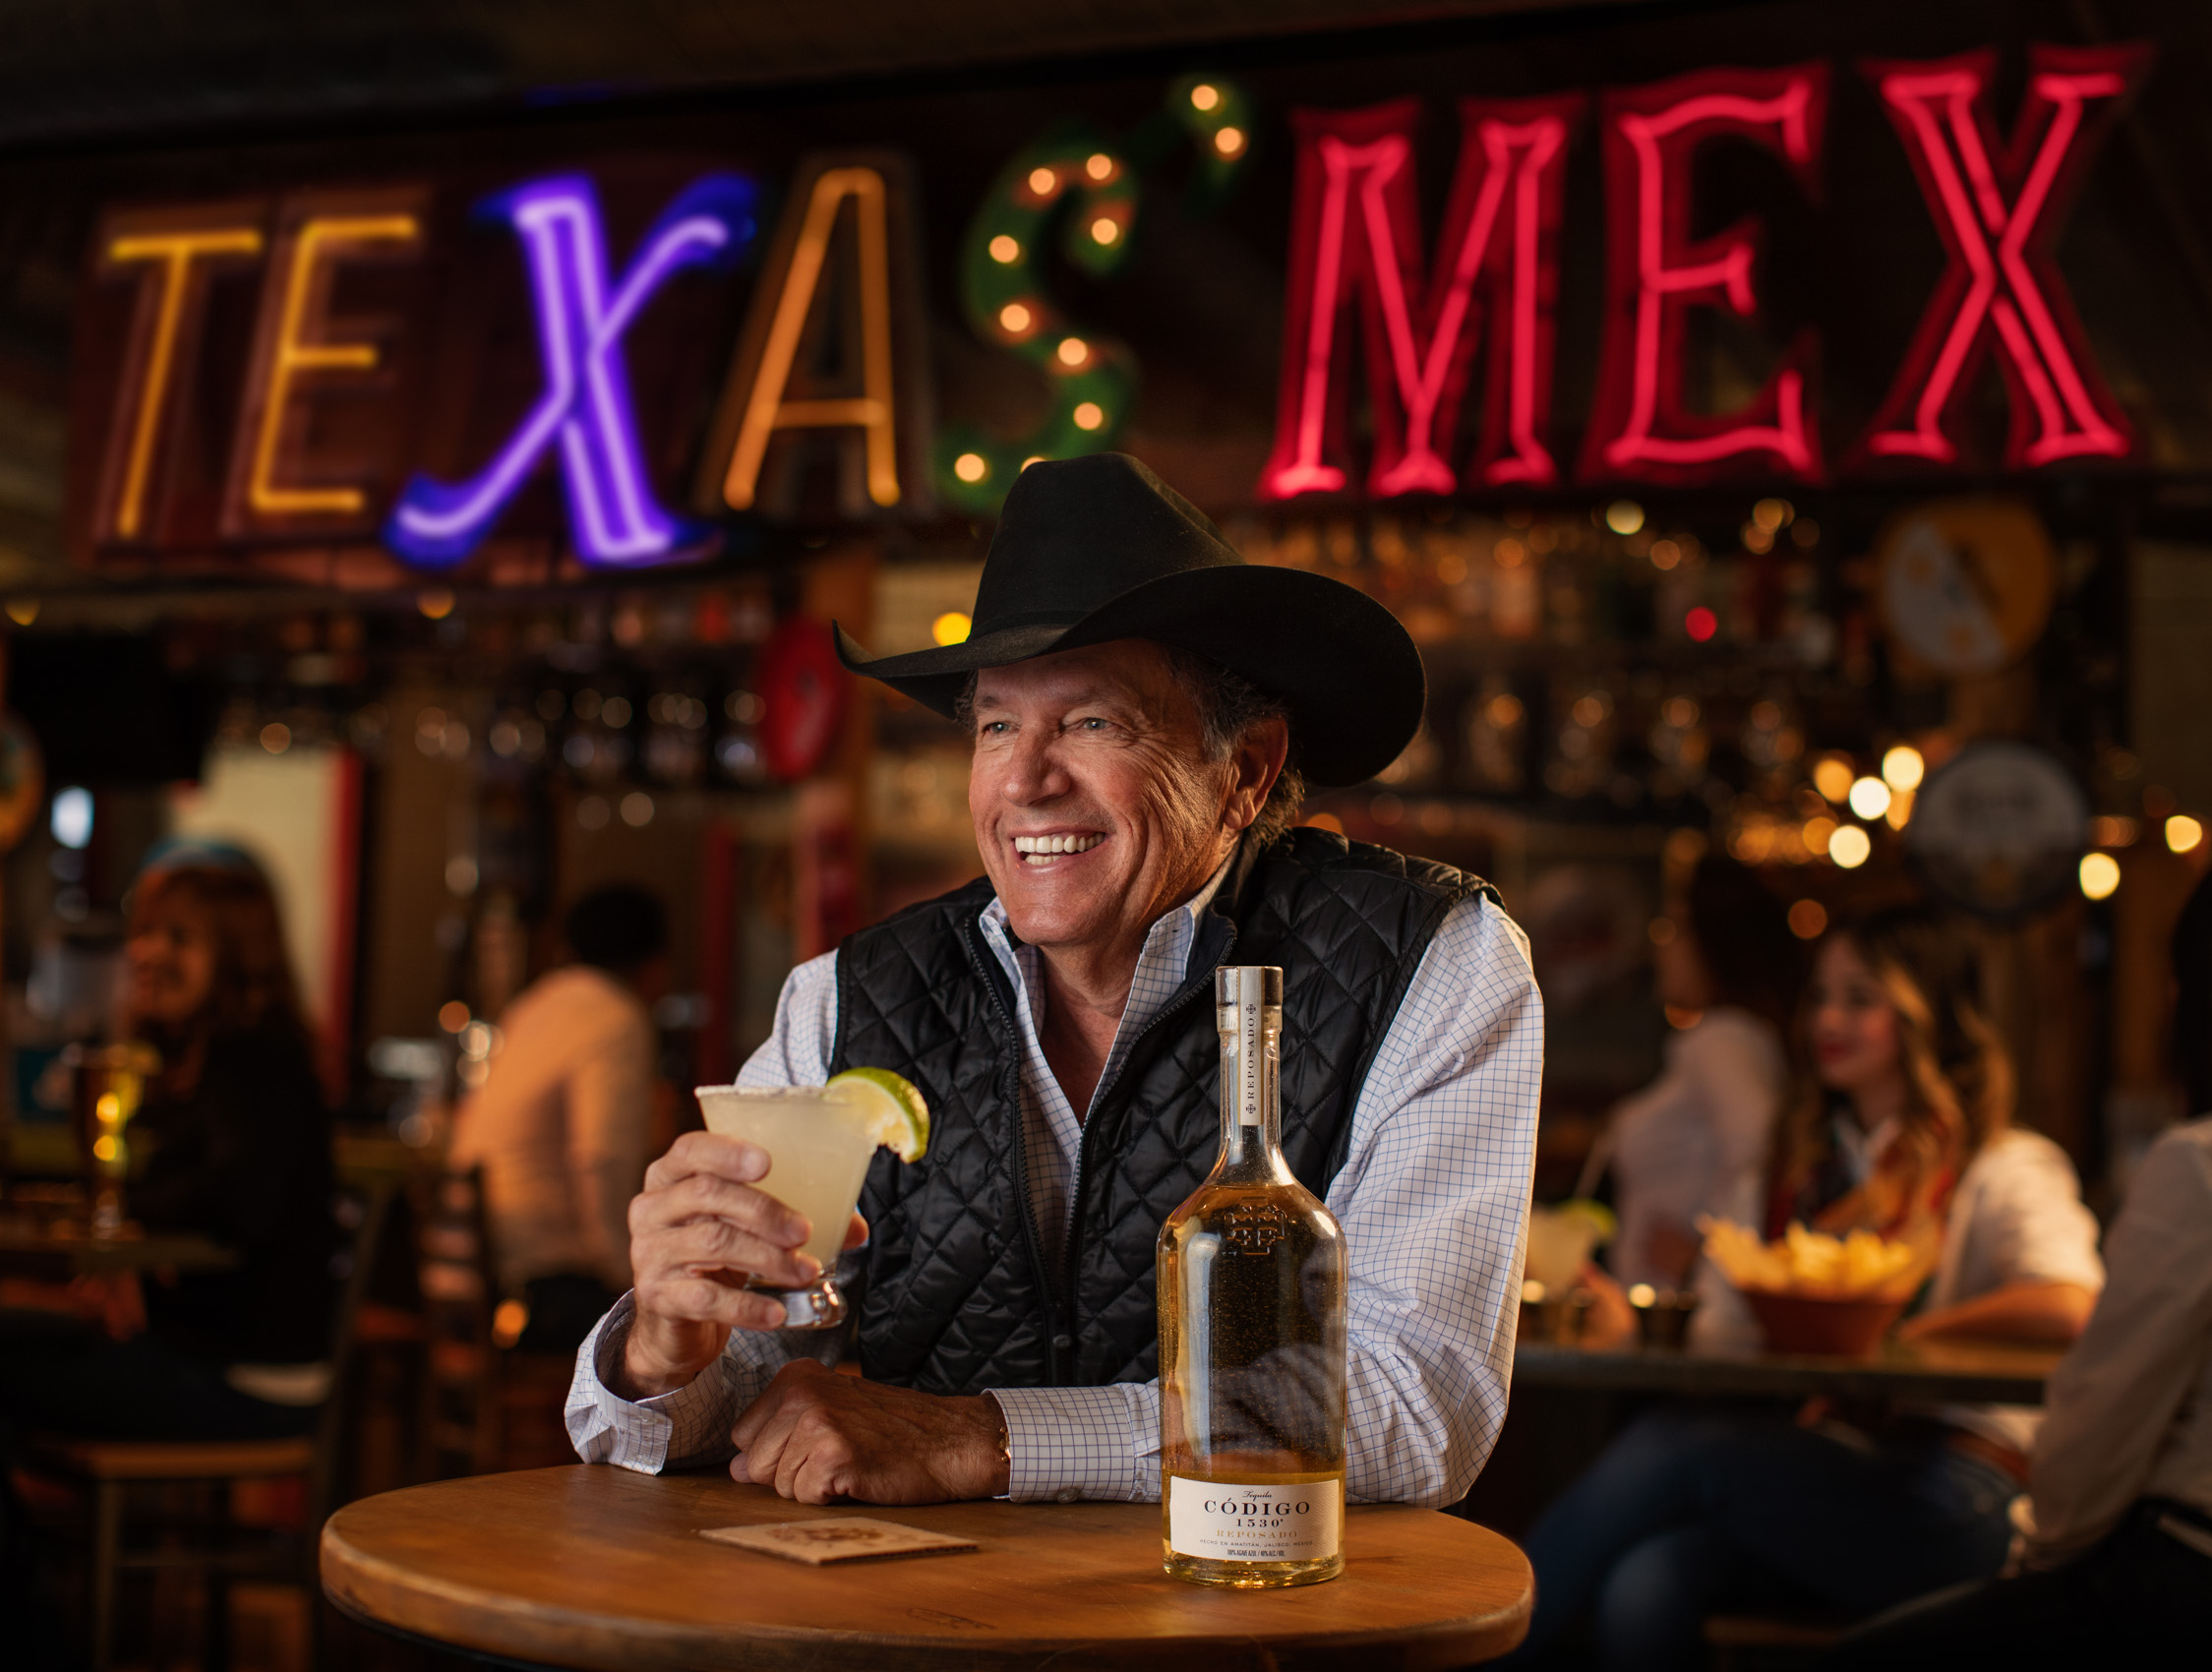 george straight holding margarita in restaurant with tex mex sign in background